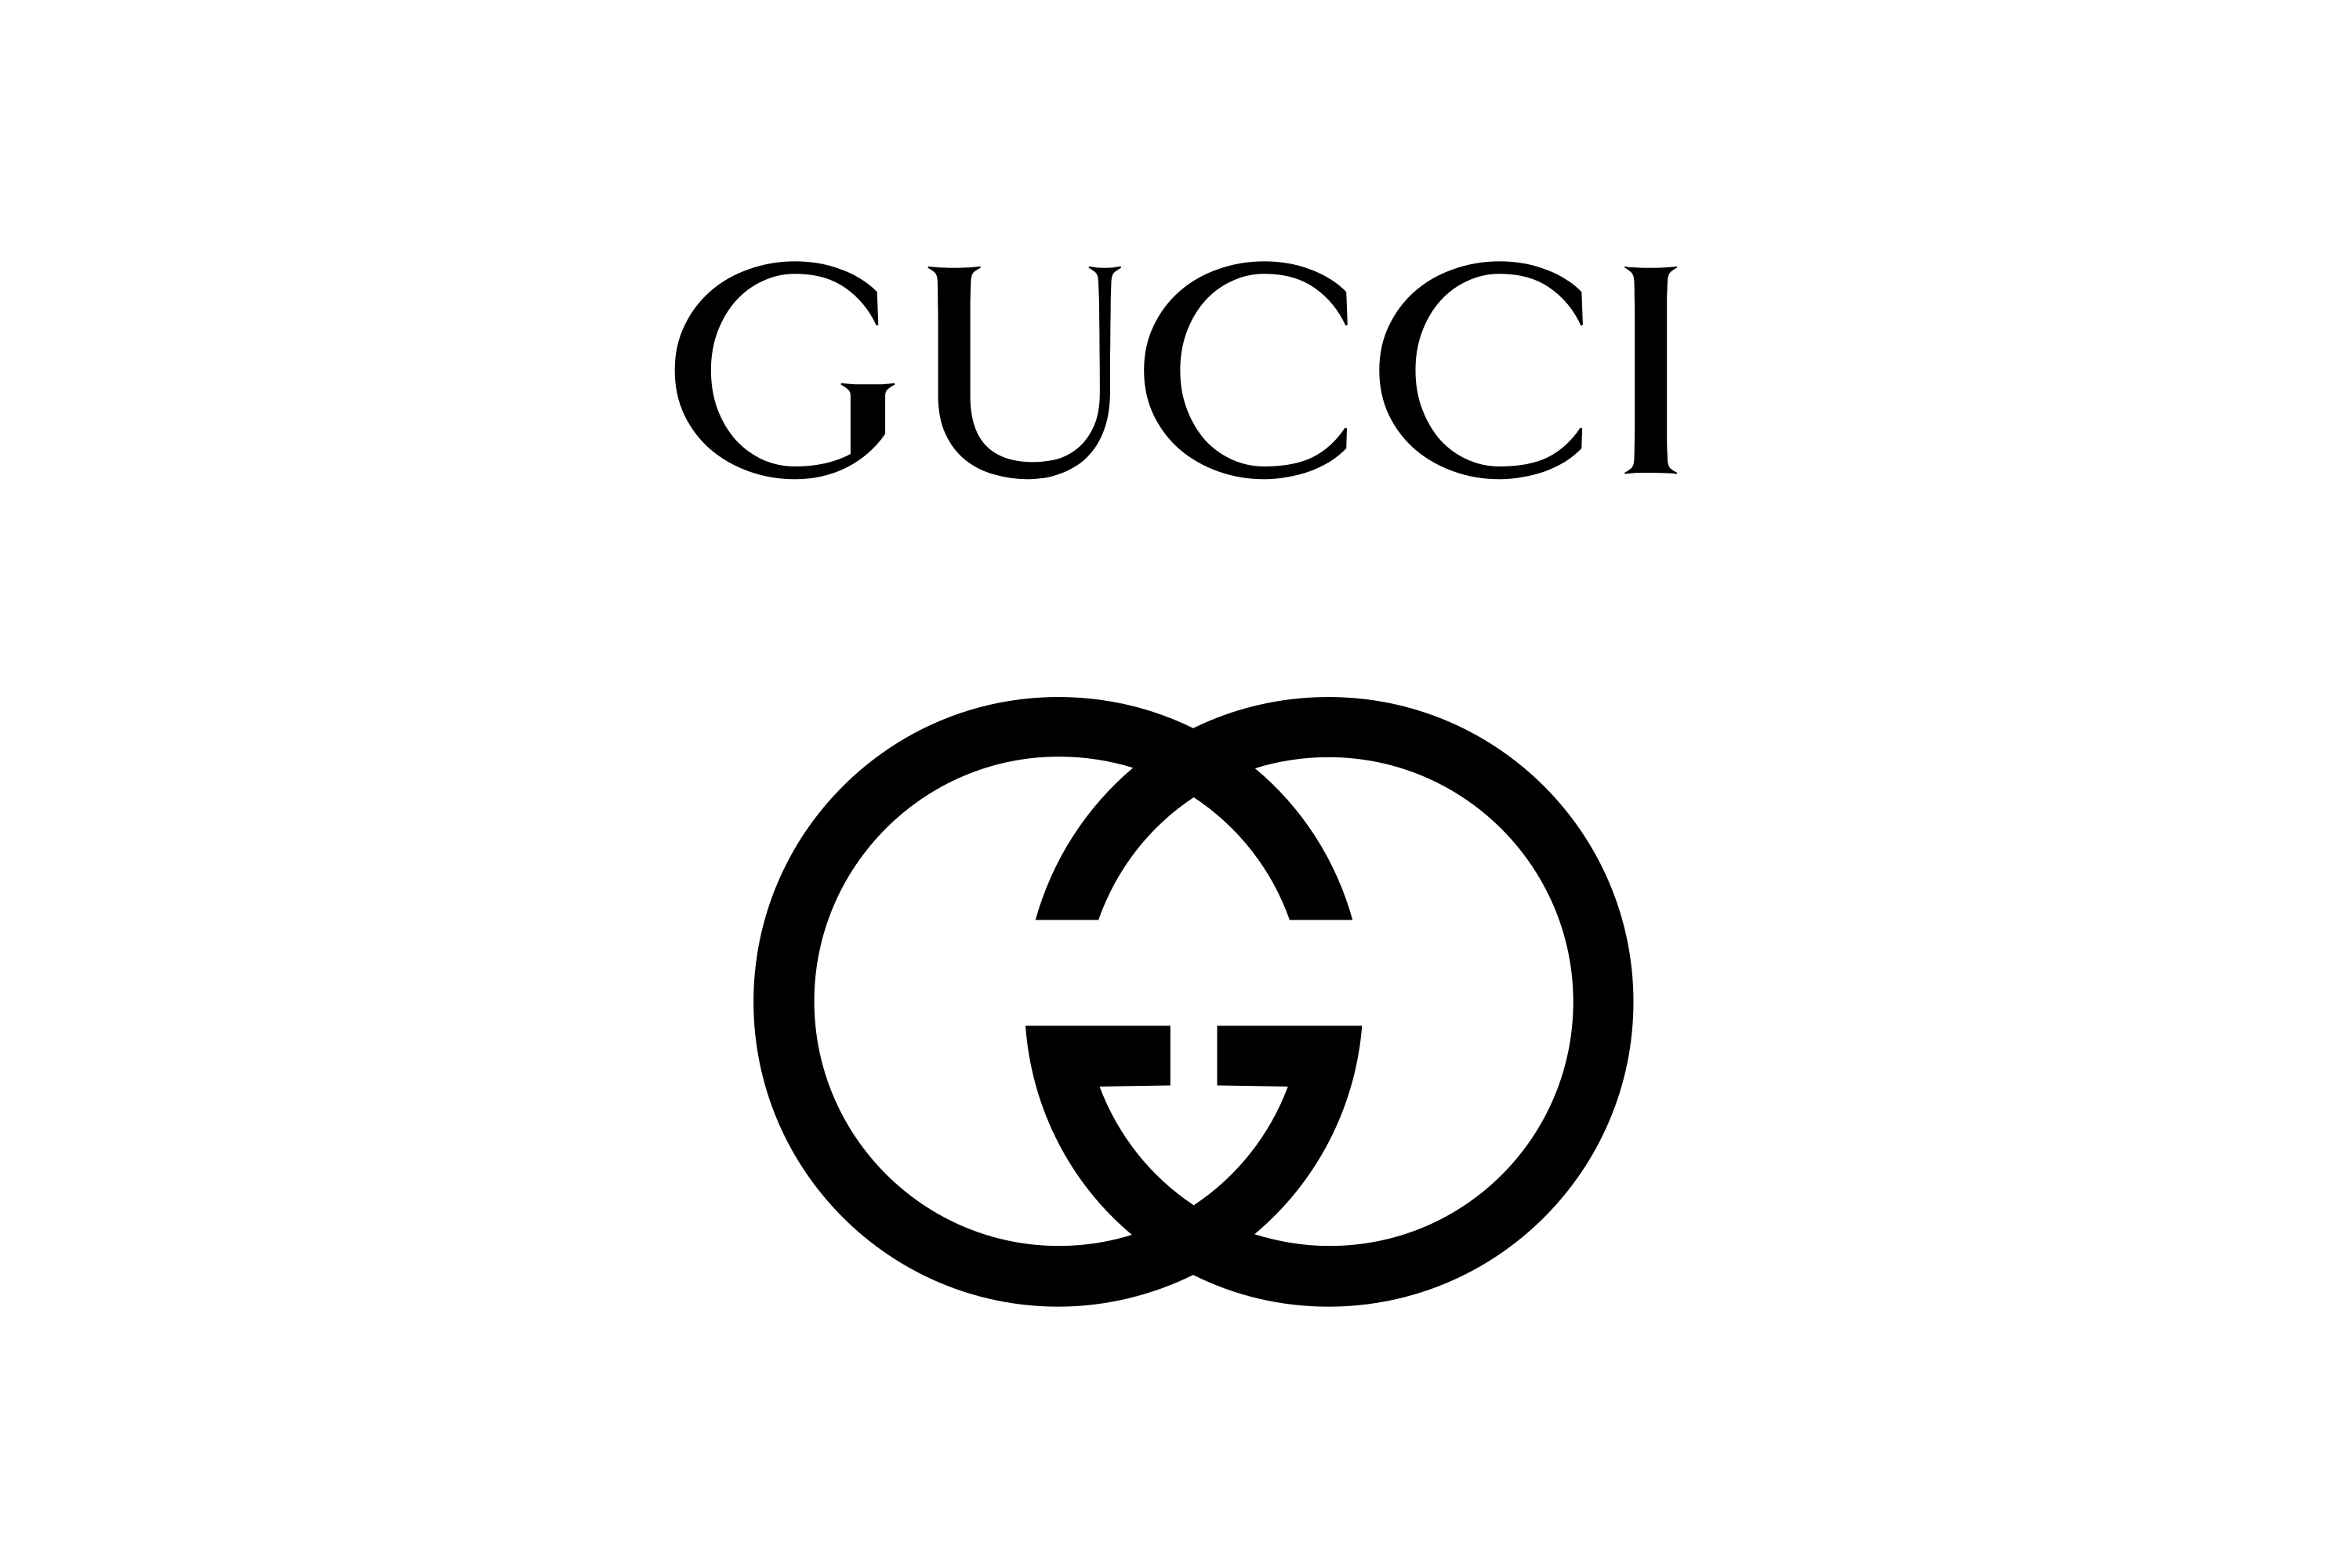 Gucci Logo - Free download logo in SVG or PNG format